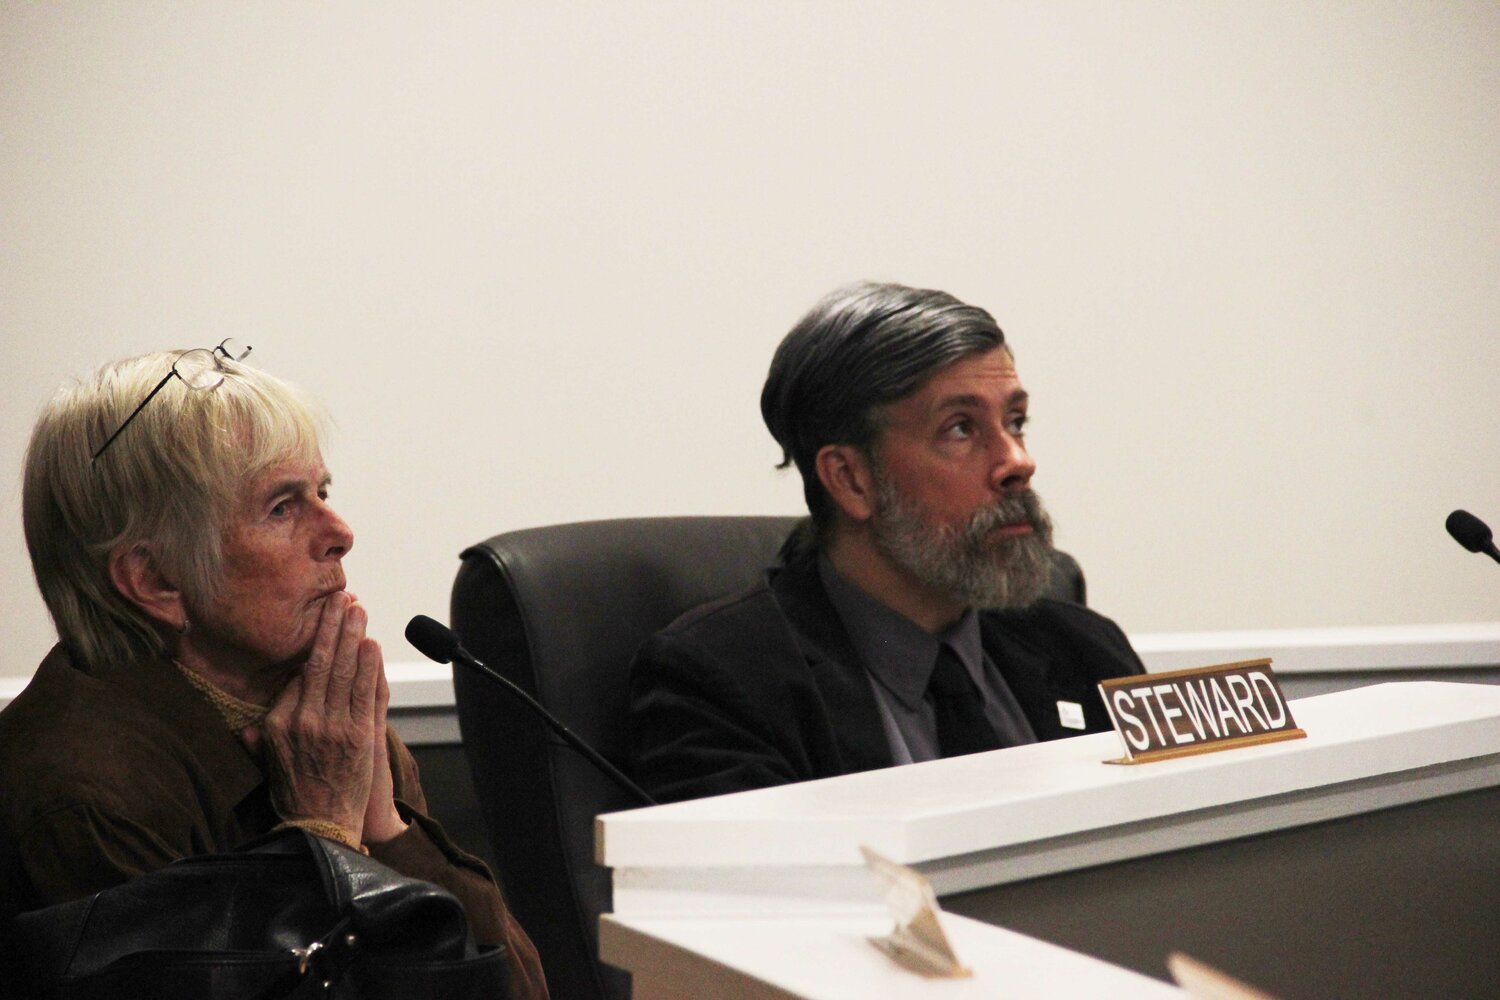 Mayor Mary Lou Steward, l., and councilmember Richard May during the Blaine City Council meeting on October 23.